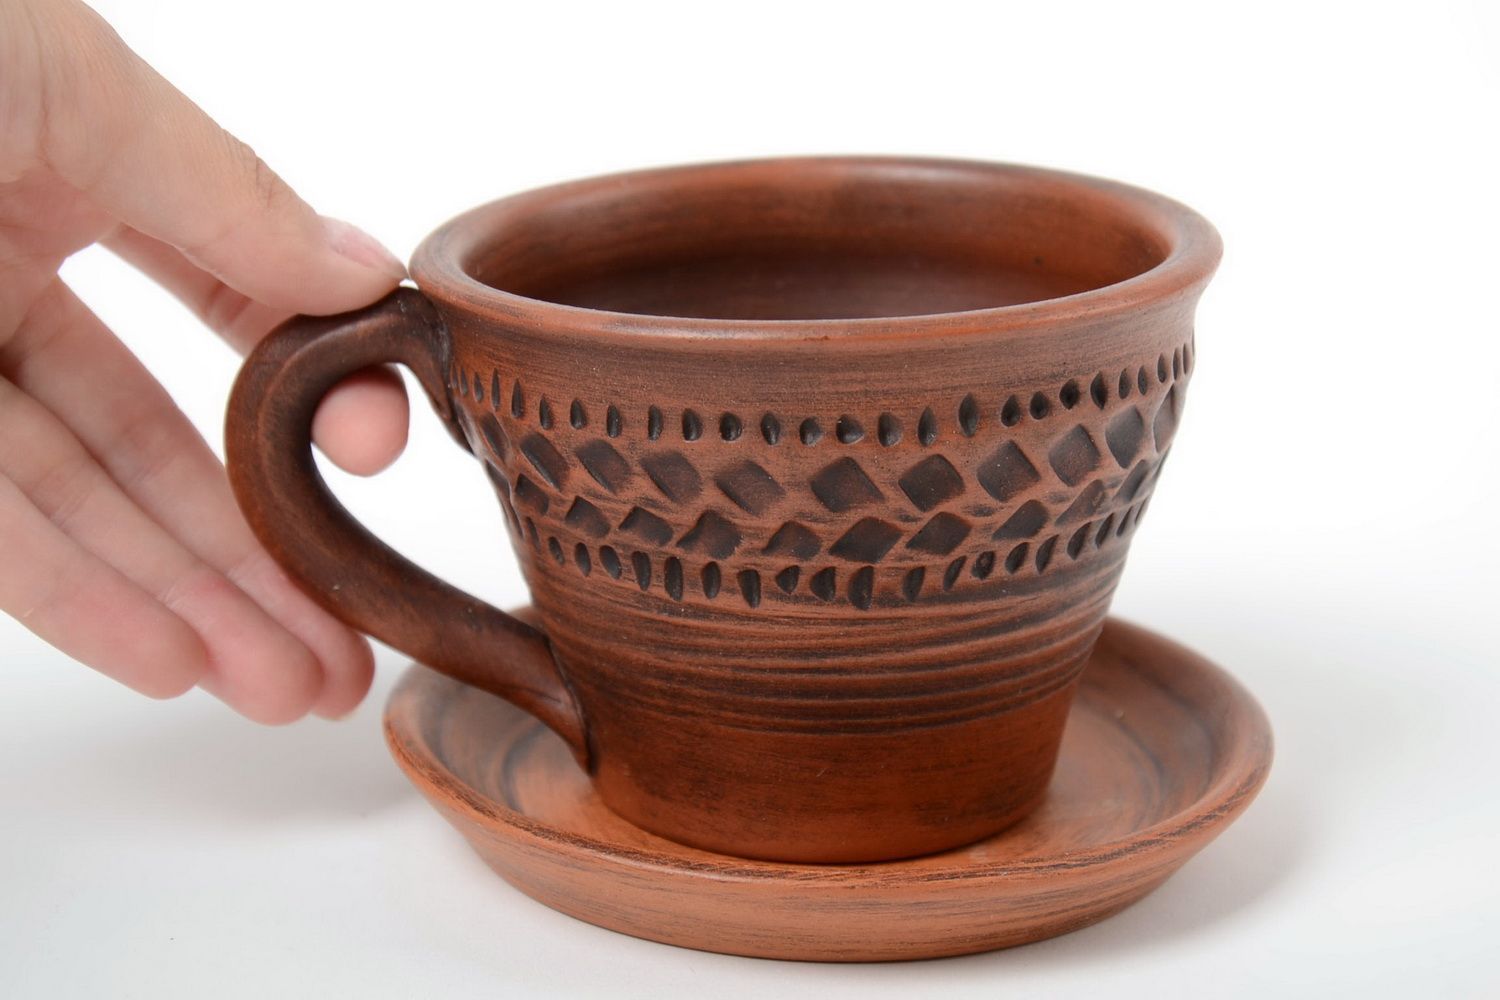 10 oz ceramic cup for coffee with saucer and handle in red brown color 0,82 lb photo 1